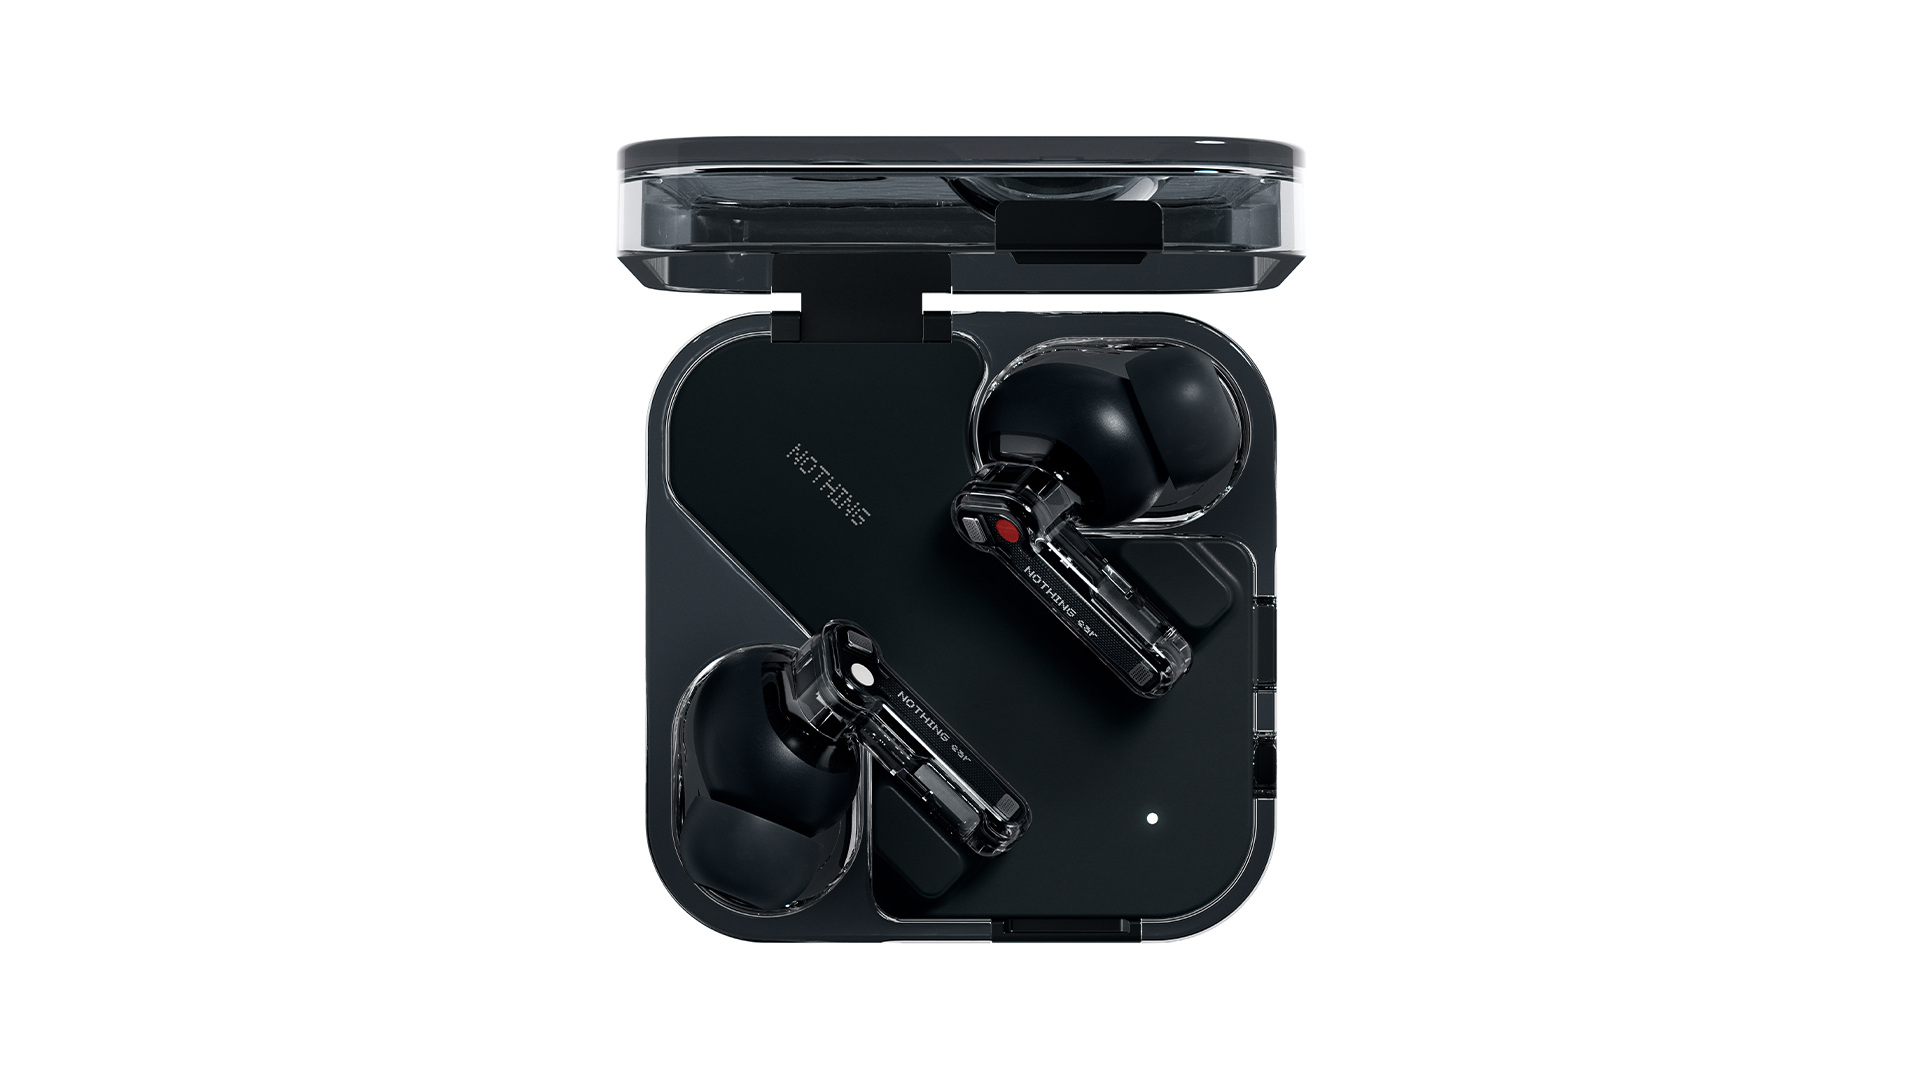 Nothing ear buds and case in black